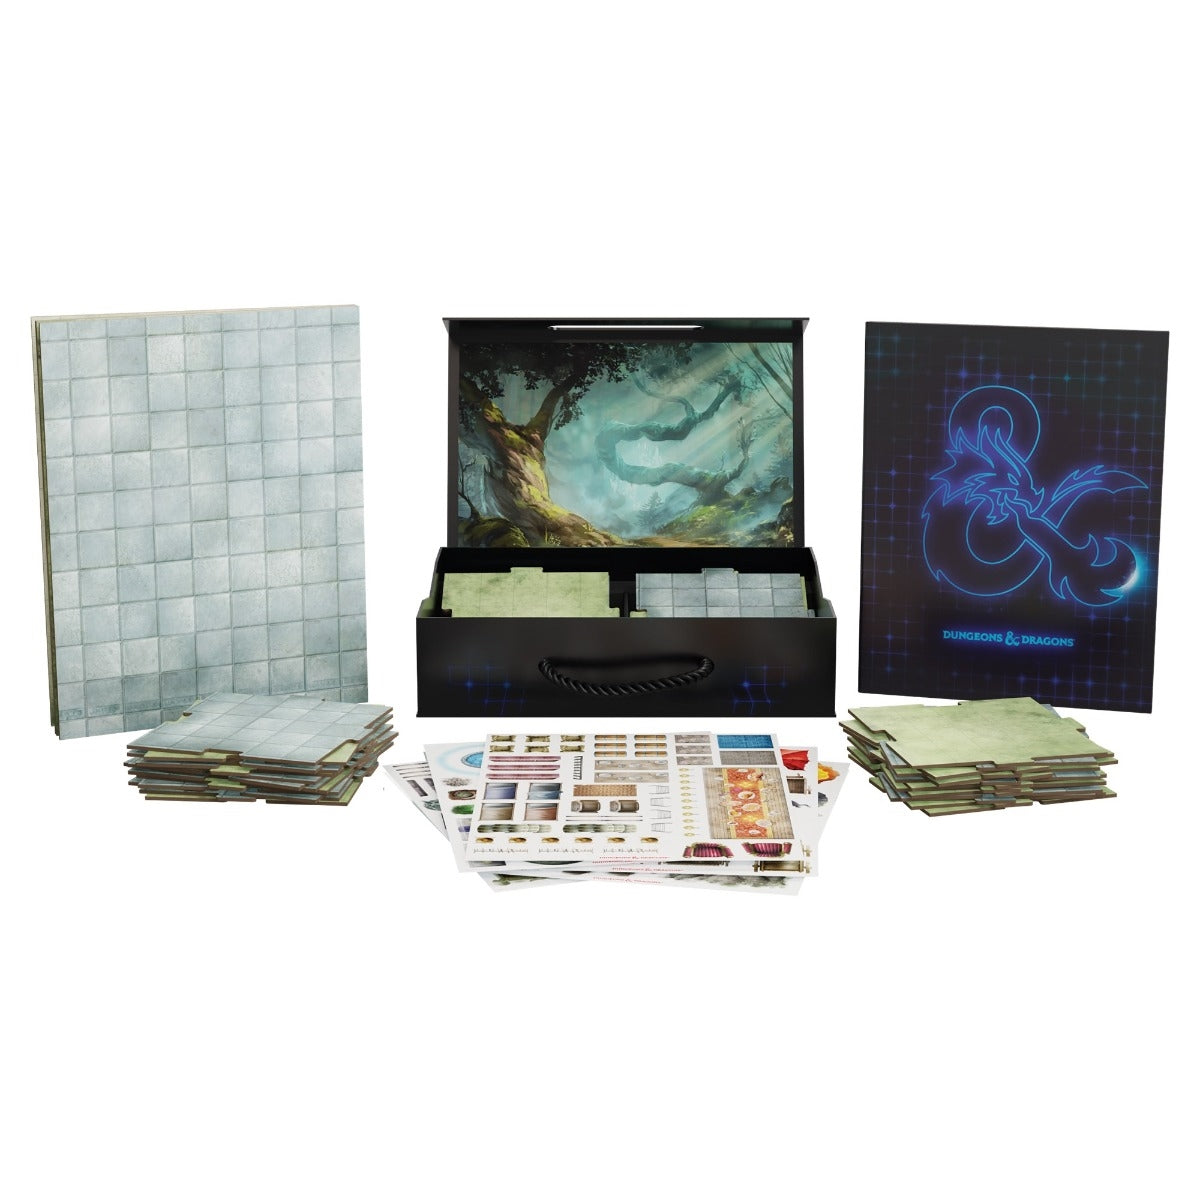 Dungeons And Dragons Campaign Case Terrain